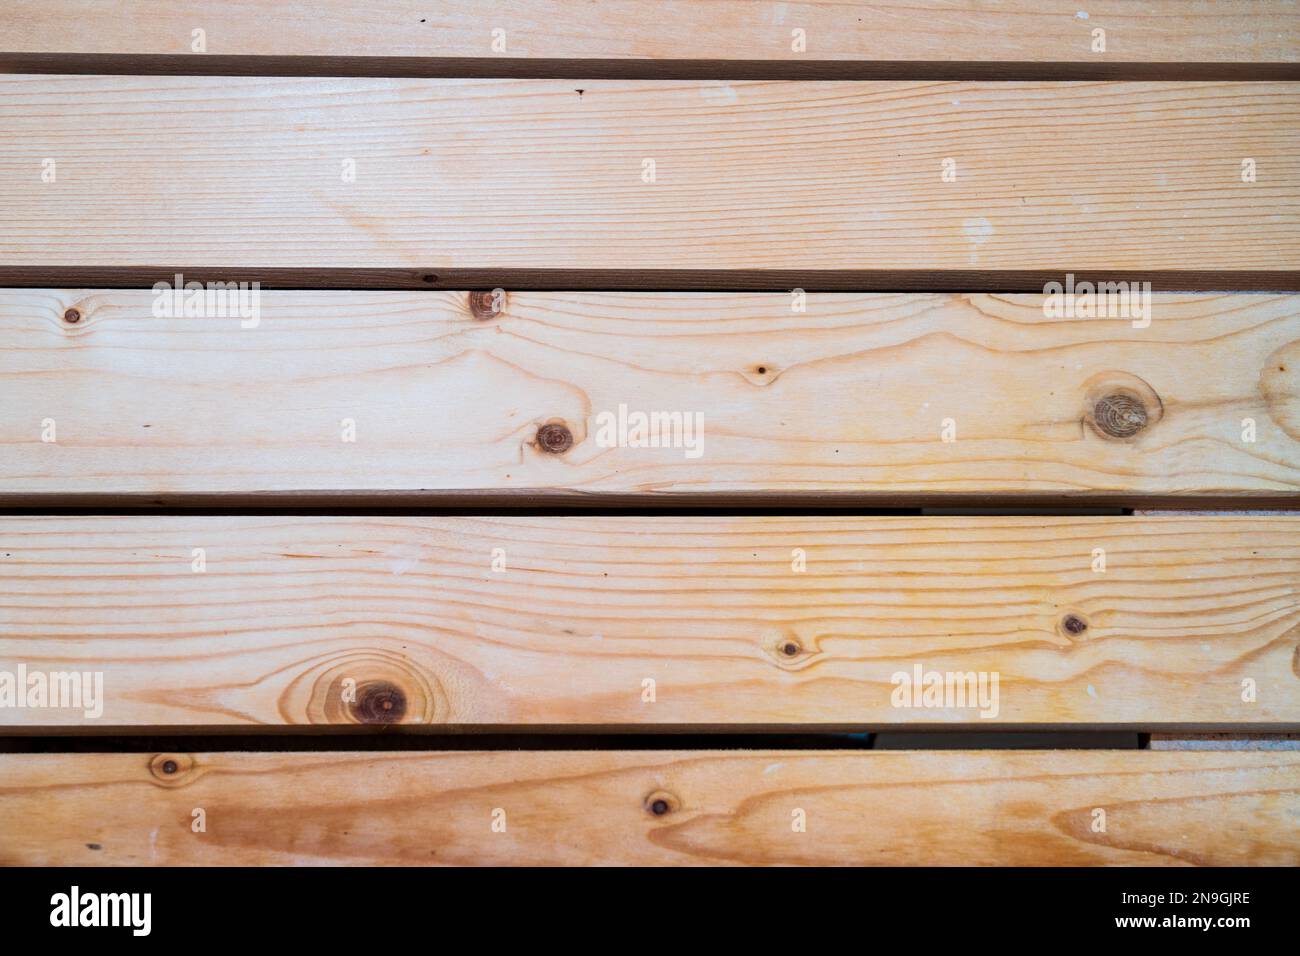 Wooden abstract background horizontal multi use Stock Photo